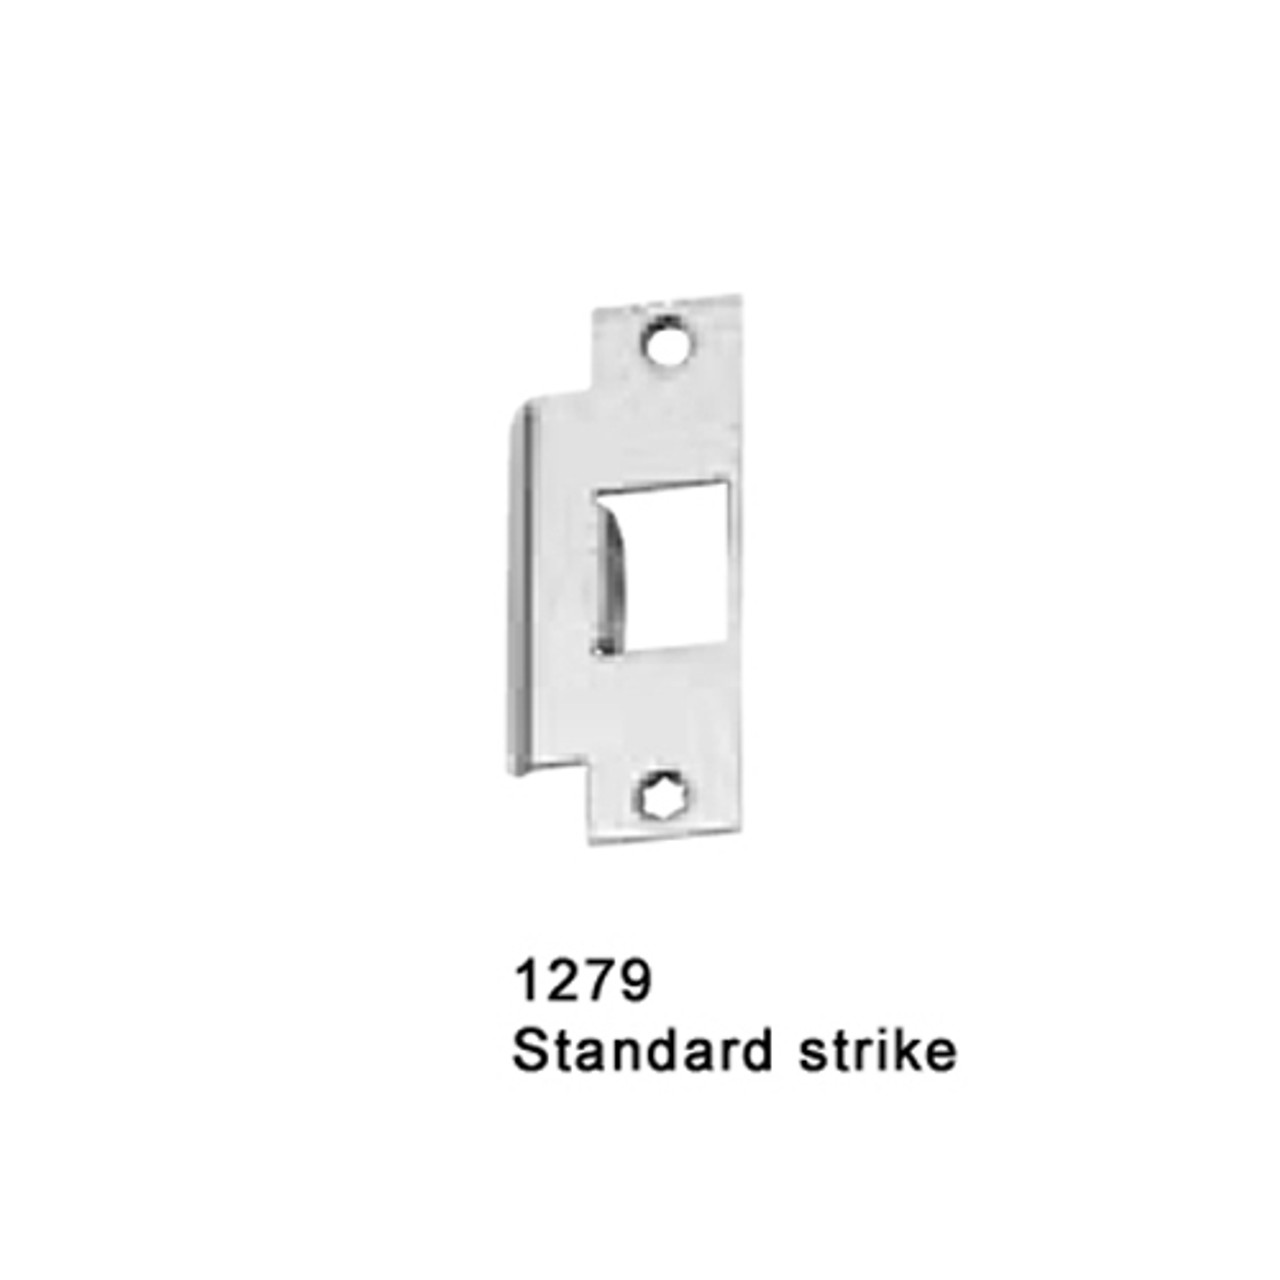 CD25-M-TP-BE-US4-3-LHR Falcon 25 Series Mortise Lock Devices 512TP-BE Thumbpiece Trim with Blank Escutcheon in Satin Brass